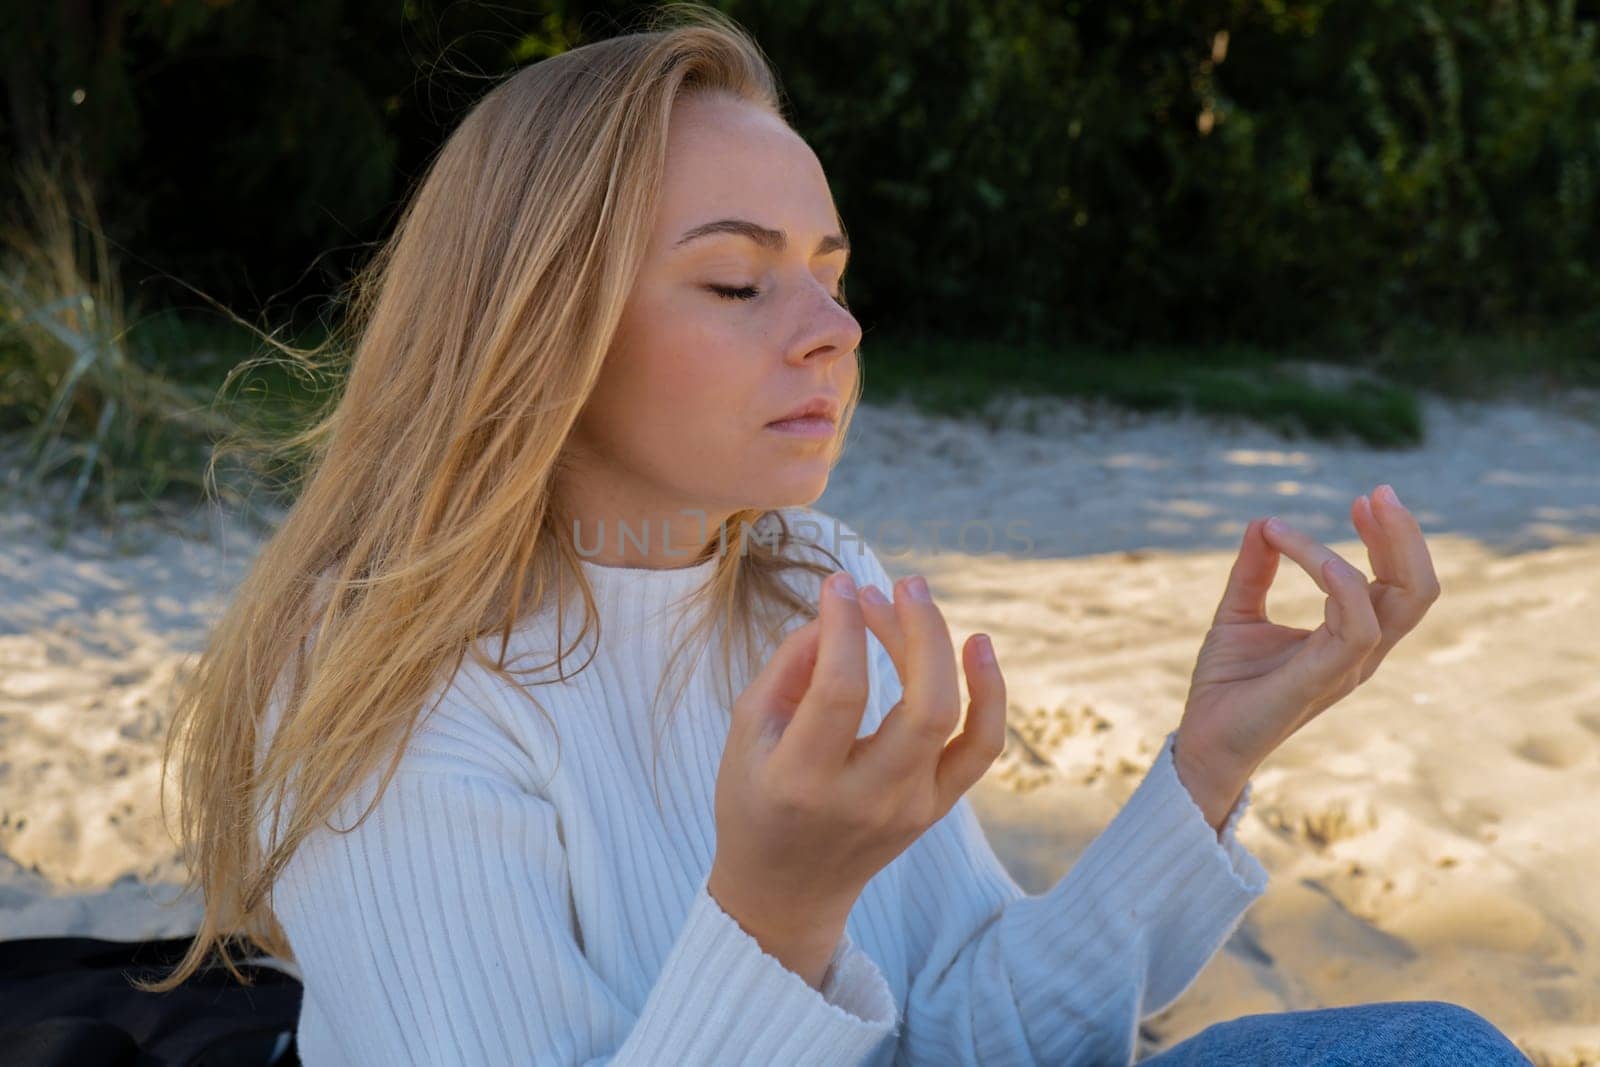 Young woman meditate on beach next to sea ocean. Breath exercises wellbeing for mental health. Breathing therapy. Balance kundalini energy every day routine practice good for woman health mindfulness. Healthy female enjoy outdoor lifestyle relaxation exercise and meditation on beach vacation